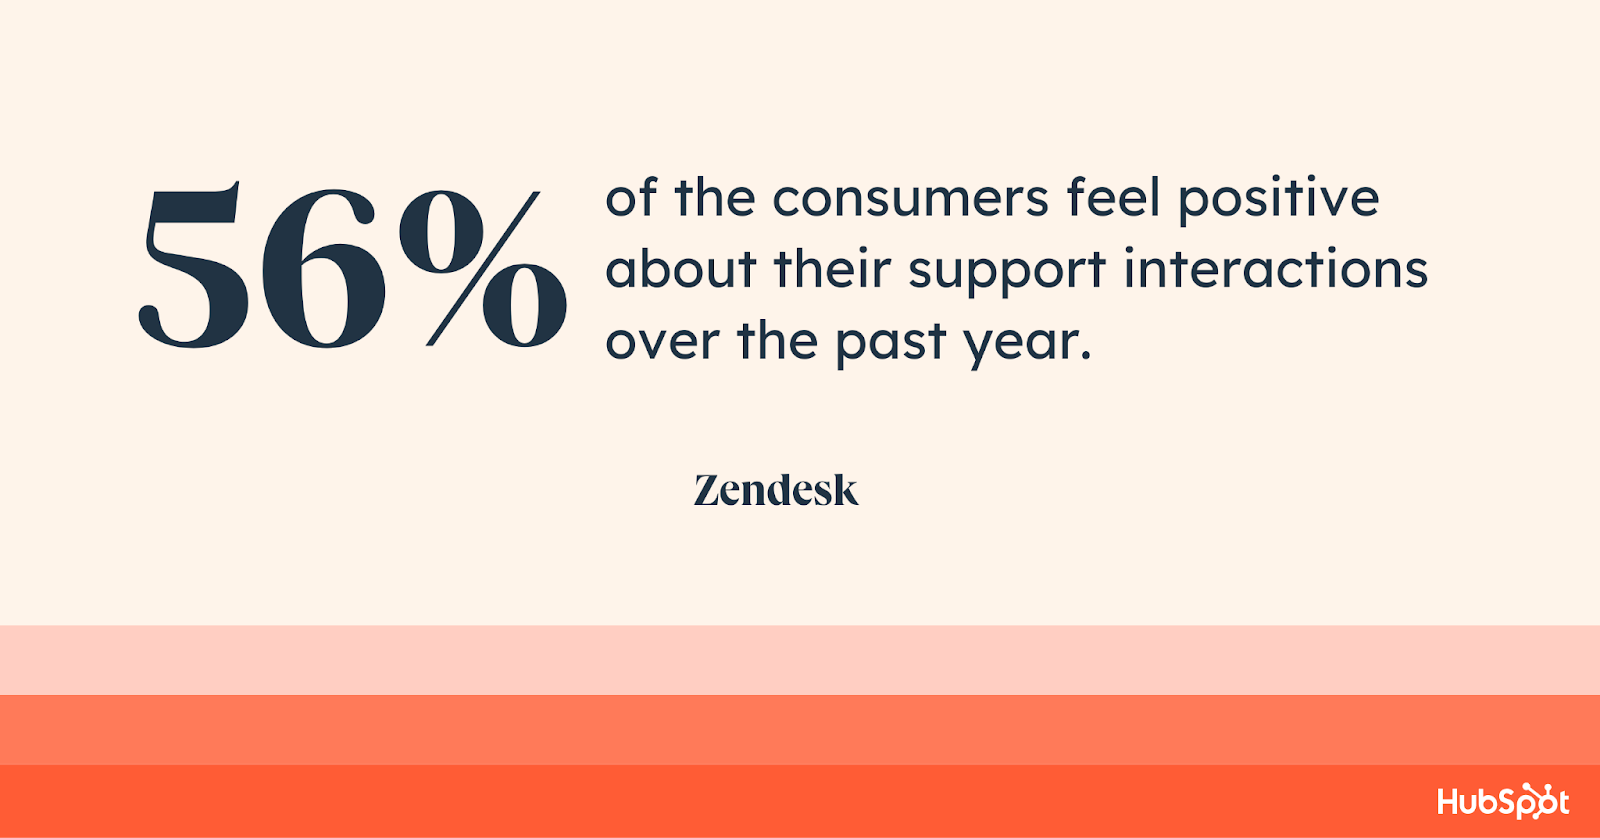 customer service statistics, 56% of the consumers feel positive about their support interactions over the past year.